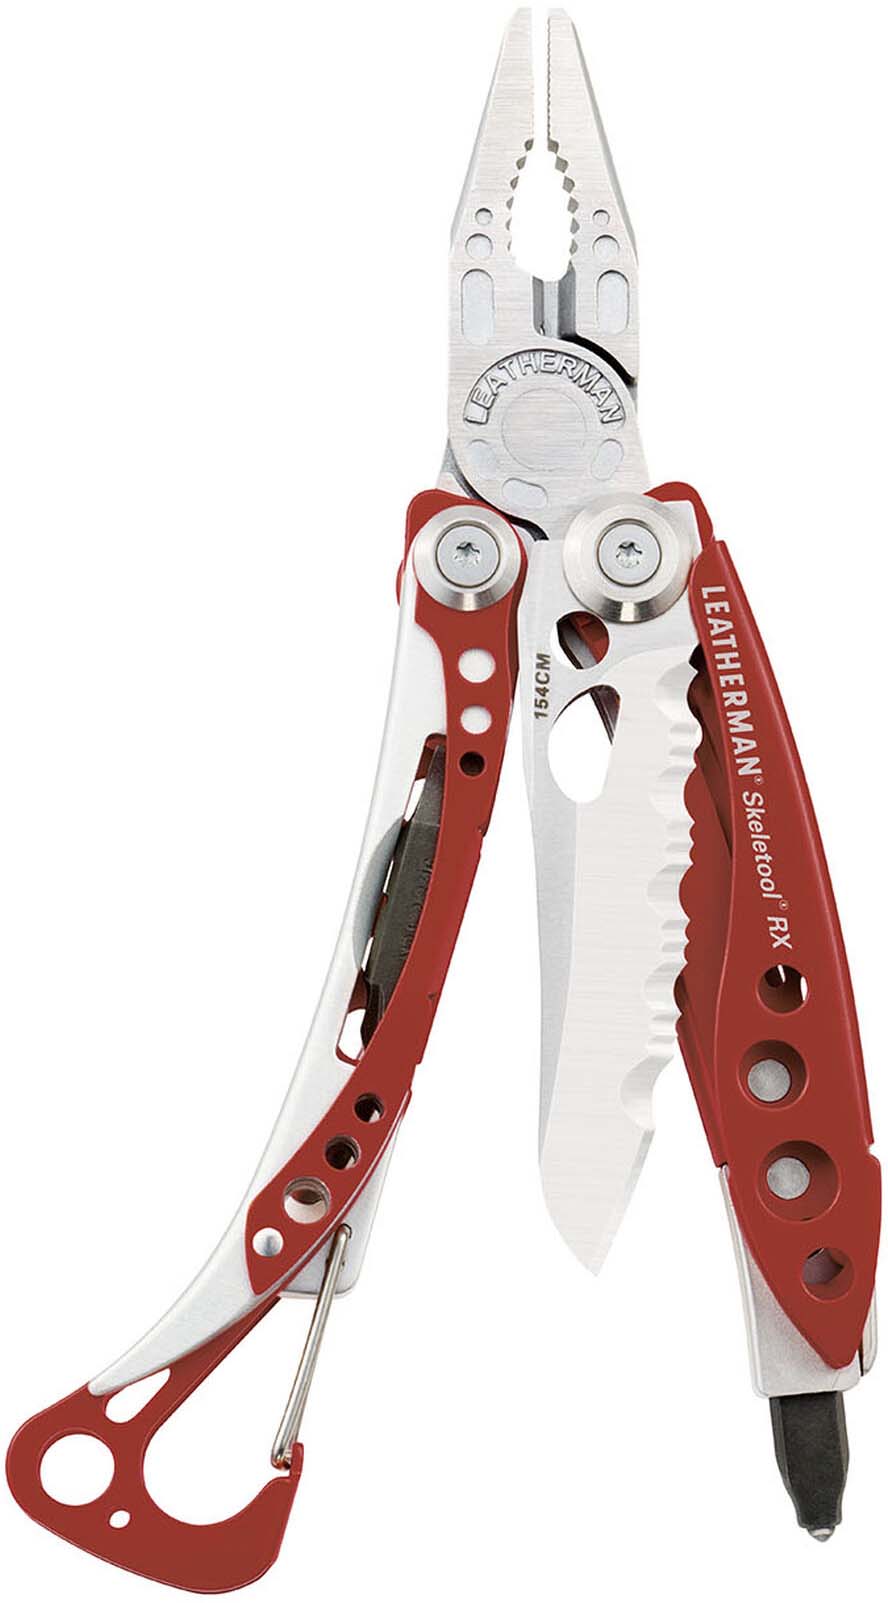 Leatherman Skeletool RX Knife 832306 with Free S&H — CampSaver